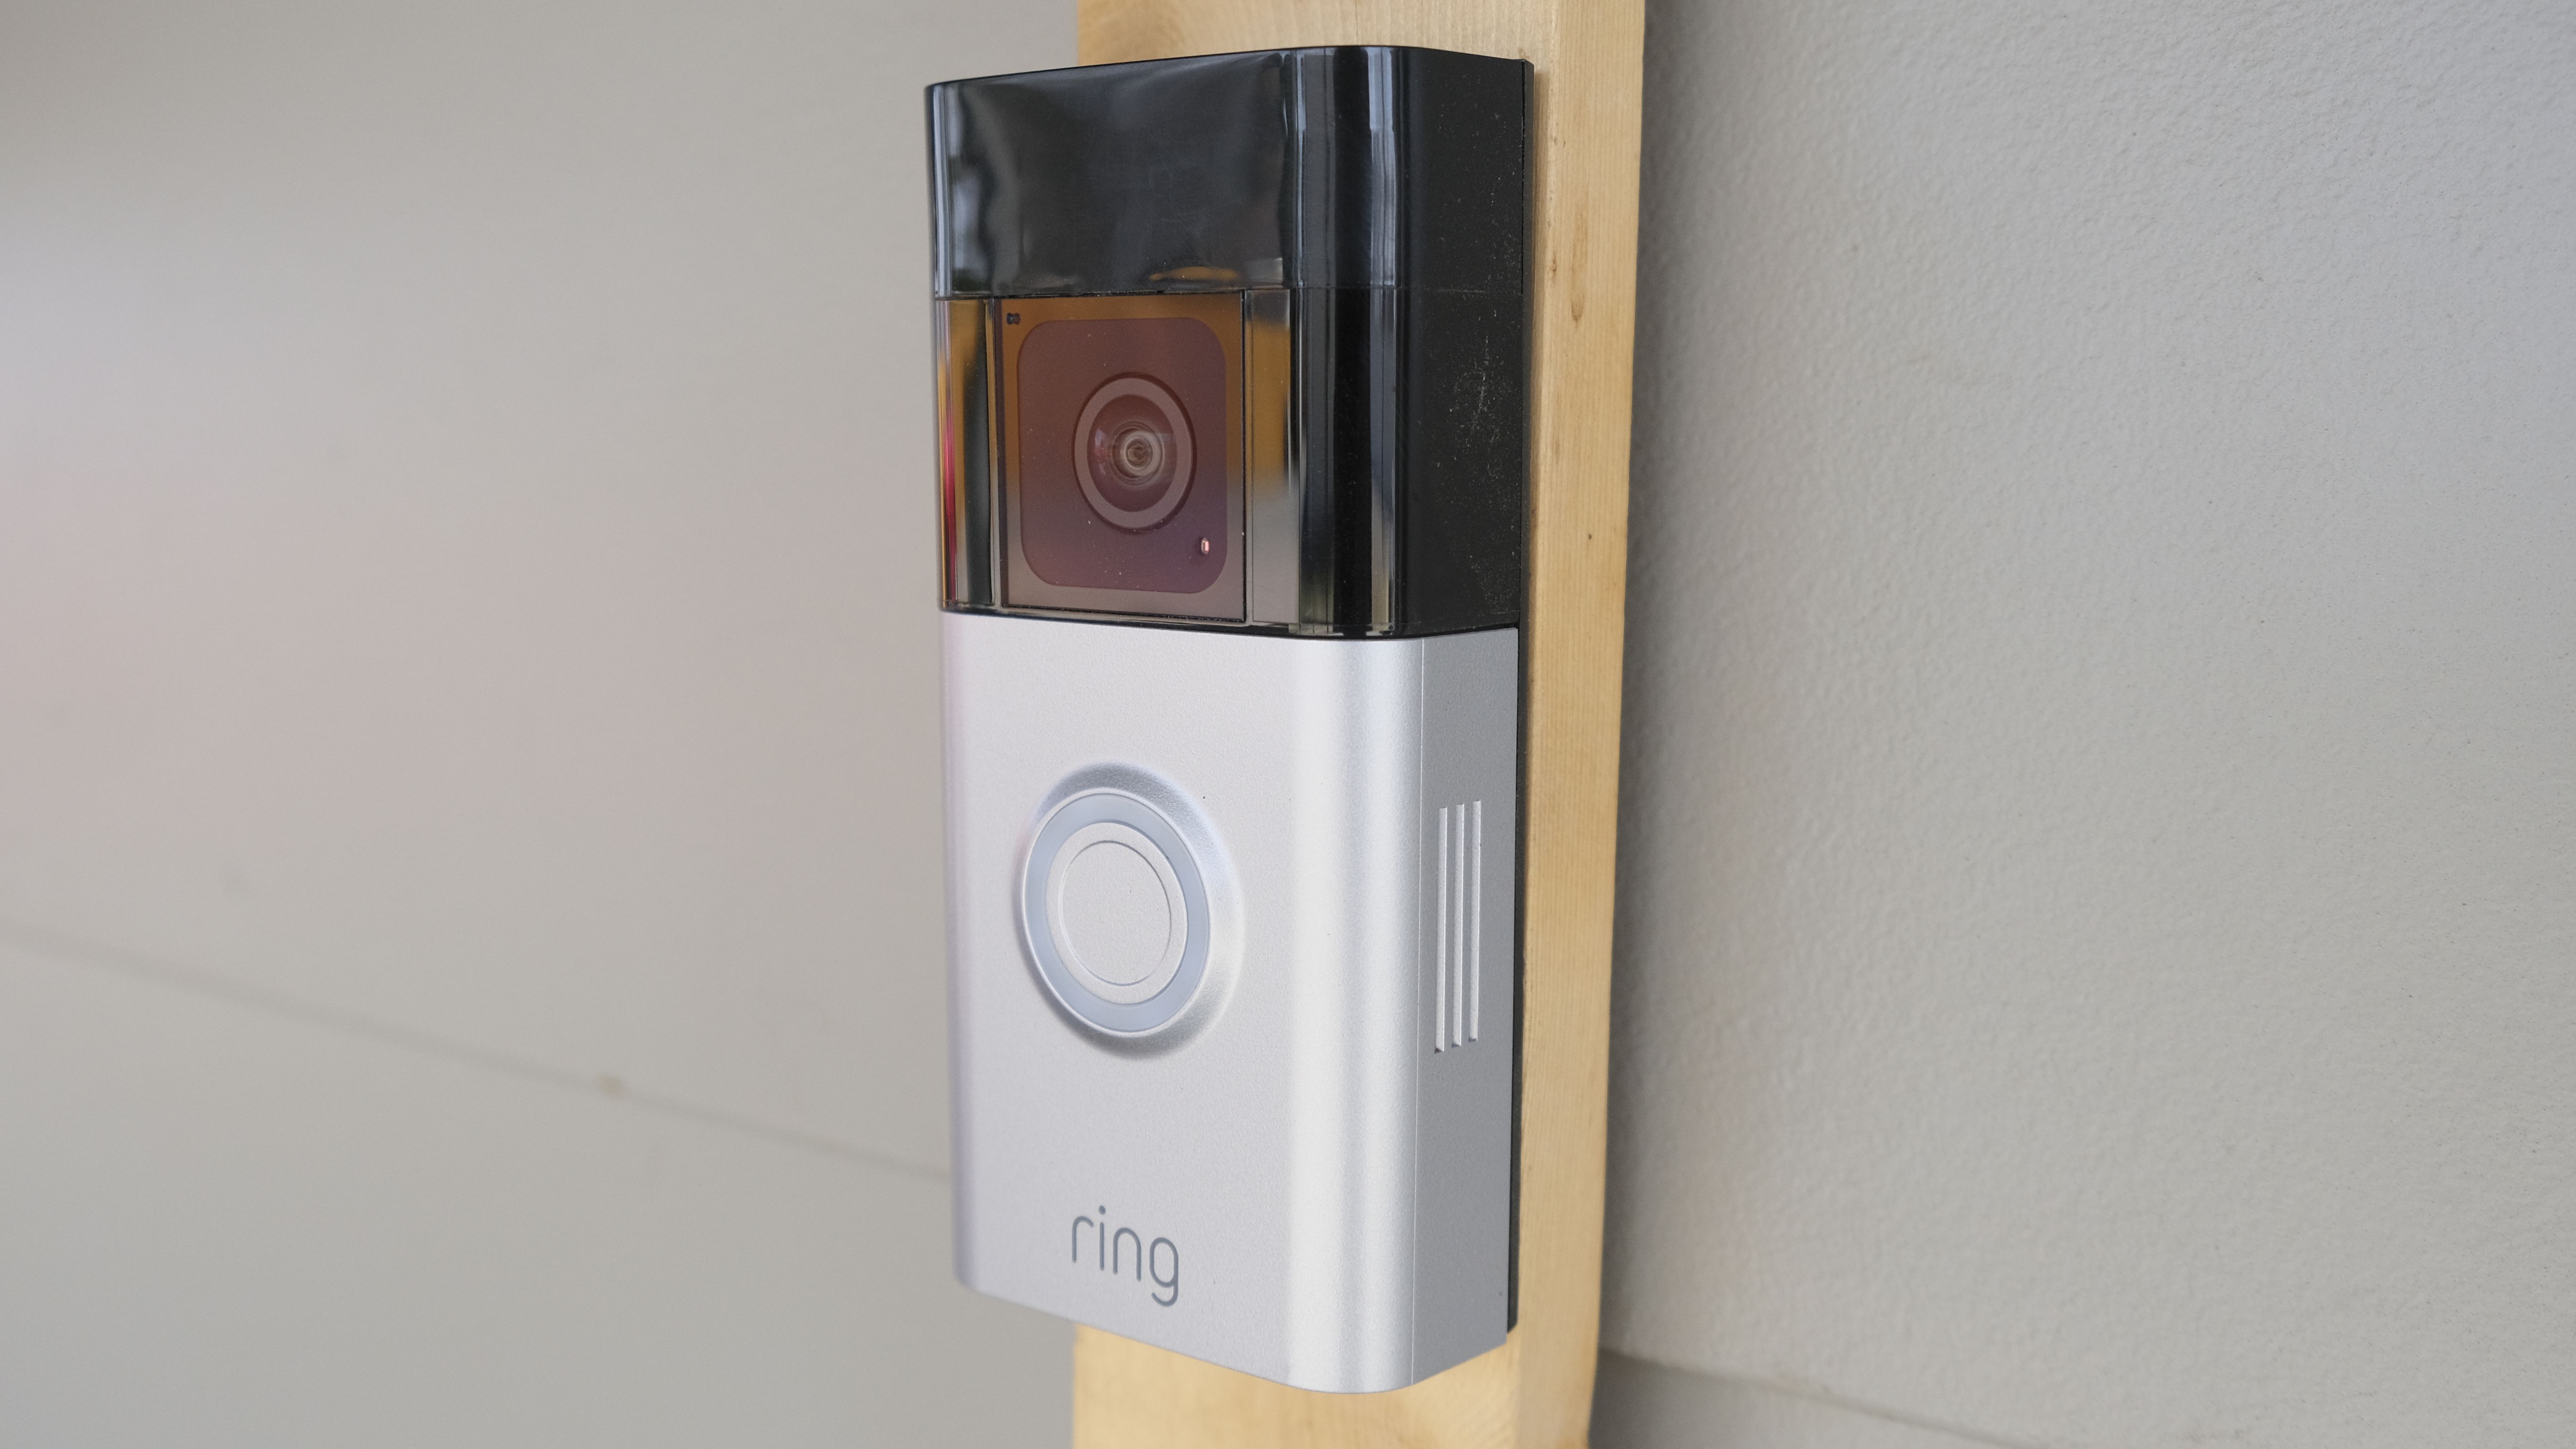 Ring Battery Doorbell Plus review